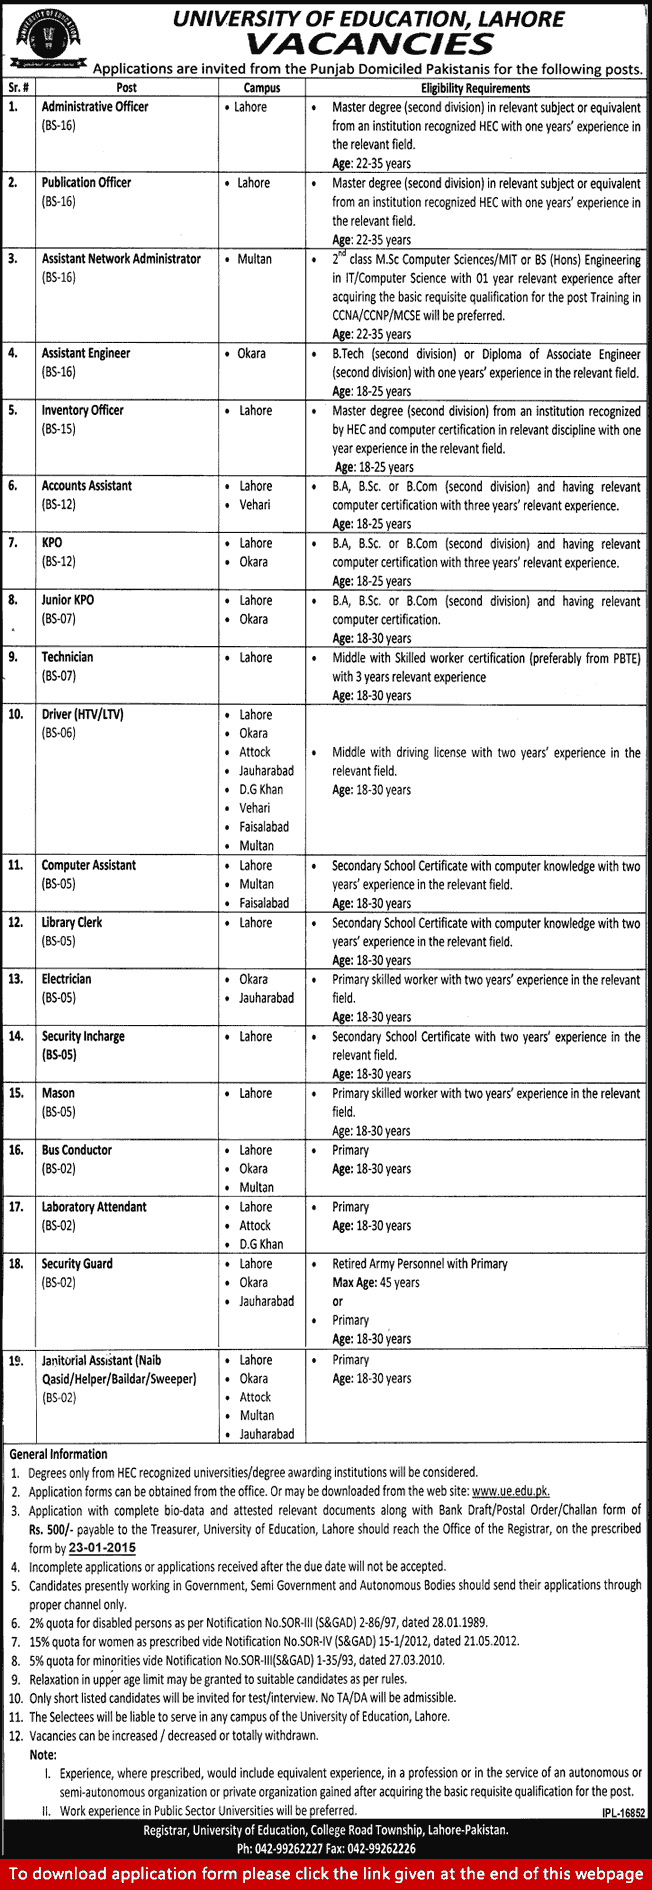 University of Education Jobs 2015 Admin / Non-Teaching Posts Application Form Download